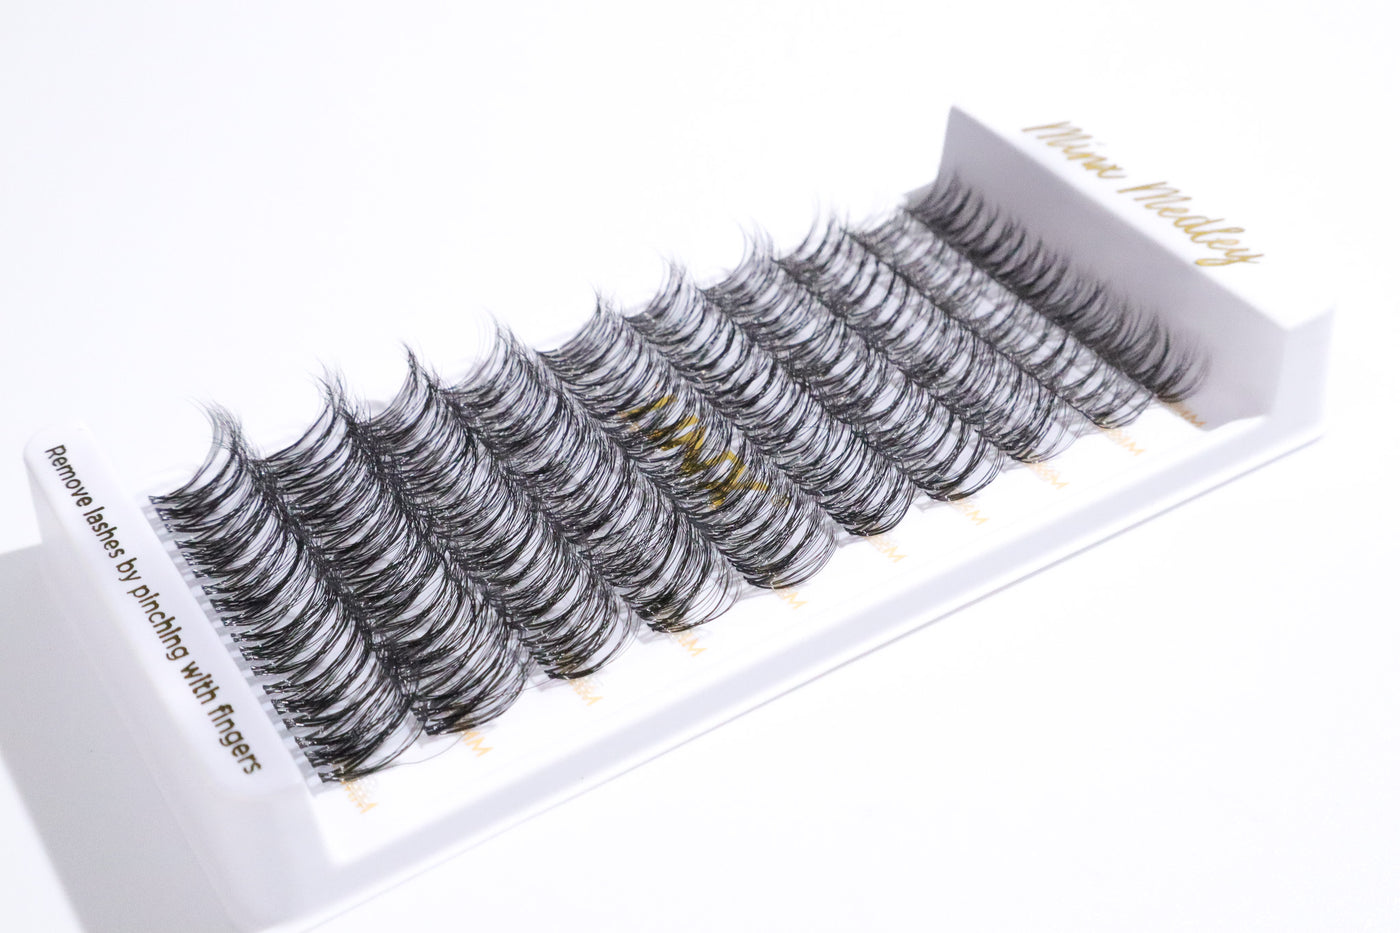 minx medley at home lashes by linx